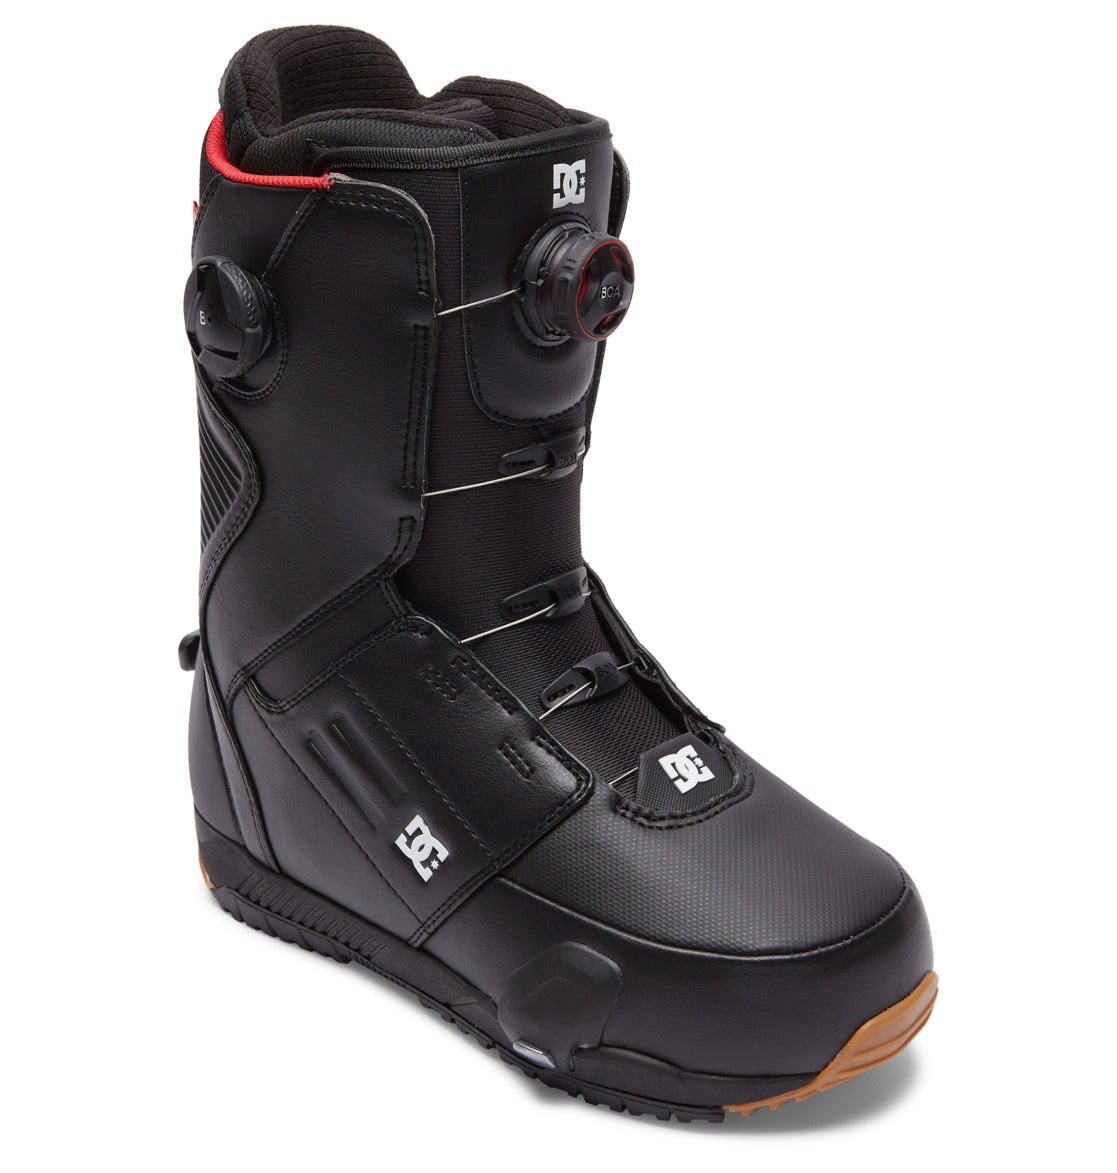 DC Control Step On snowboard boots - Black